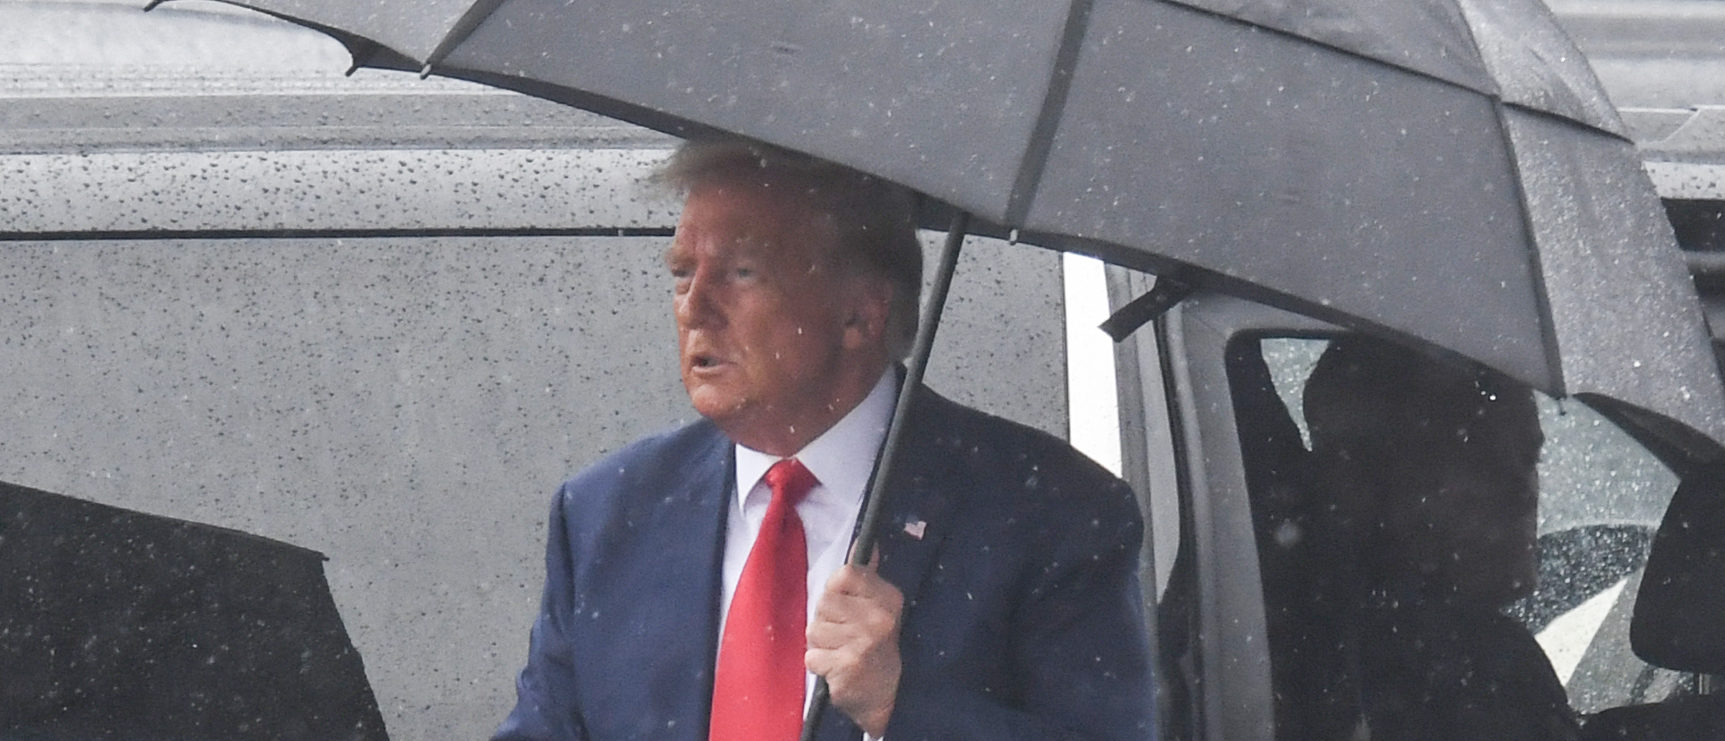 Former US President and 2024 hopeful Donald Trump arrives to Ronald Reagan Washington National Airport in Arlington, Virginia, on August 3, 2023, after his arraignment in court. Trump pleaded not guilty Thursday, August 3, to historic charges that he led a criminal conspiracy seeking to defraud the American people by overturning the 2020 election. The 77-year-old Republican told magistrate judge Moxila Upadhyaya he was pleading "not guilty" to all four counts against him. (Photo by OLIVIER DOULIERY / AFP) (Photo by OLIVIER DOULIERY/AFP via Getty Images)